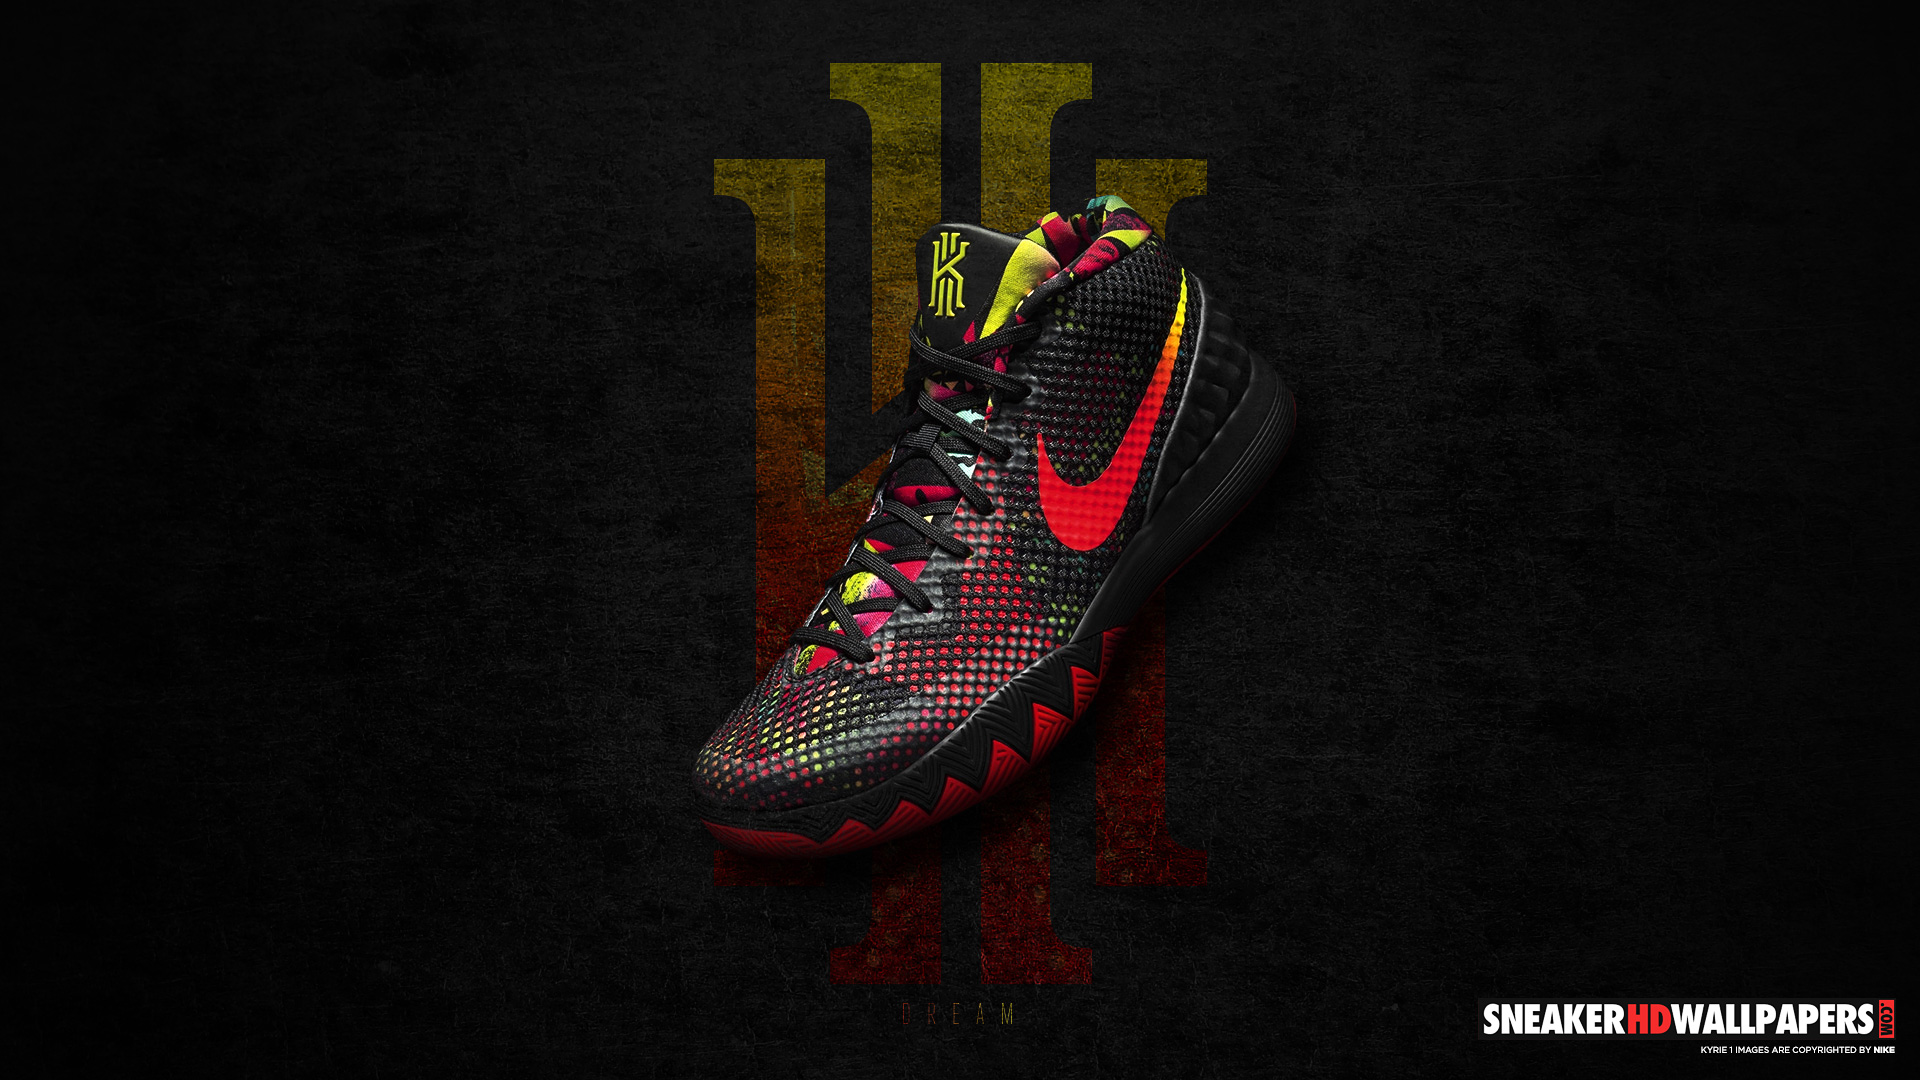 Dream Kyrie Nike Wallpaper Link At The Bottom